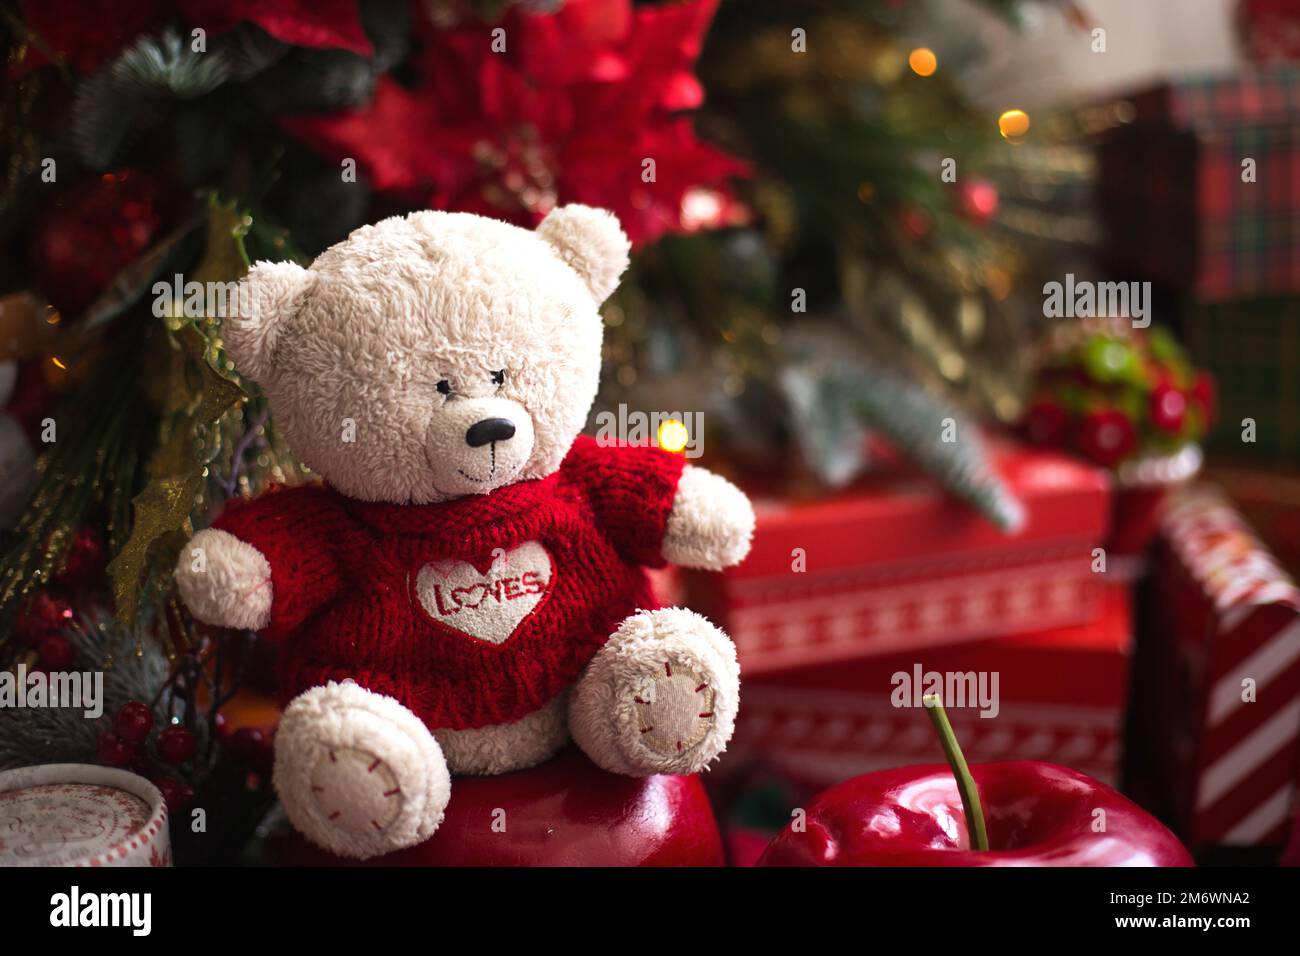 White Teddy bear in red knitted sweater with heart on the chest and the words Love near Christmas tree among the gift boxes. Gif Stock Photo